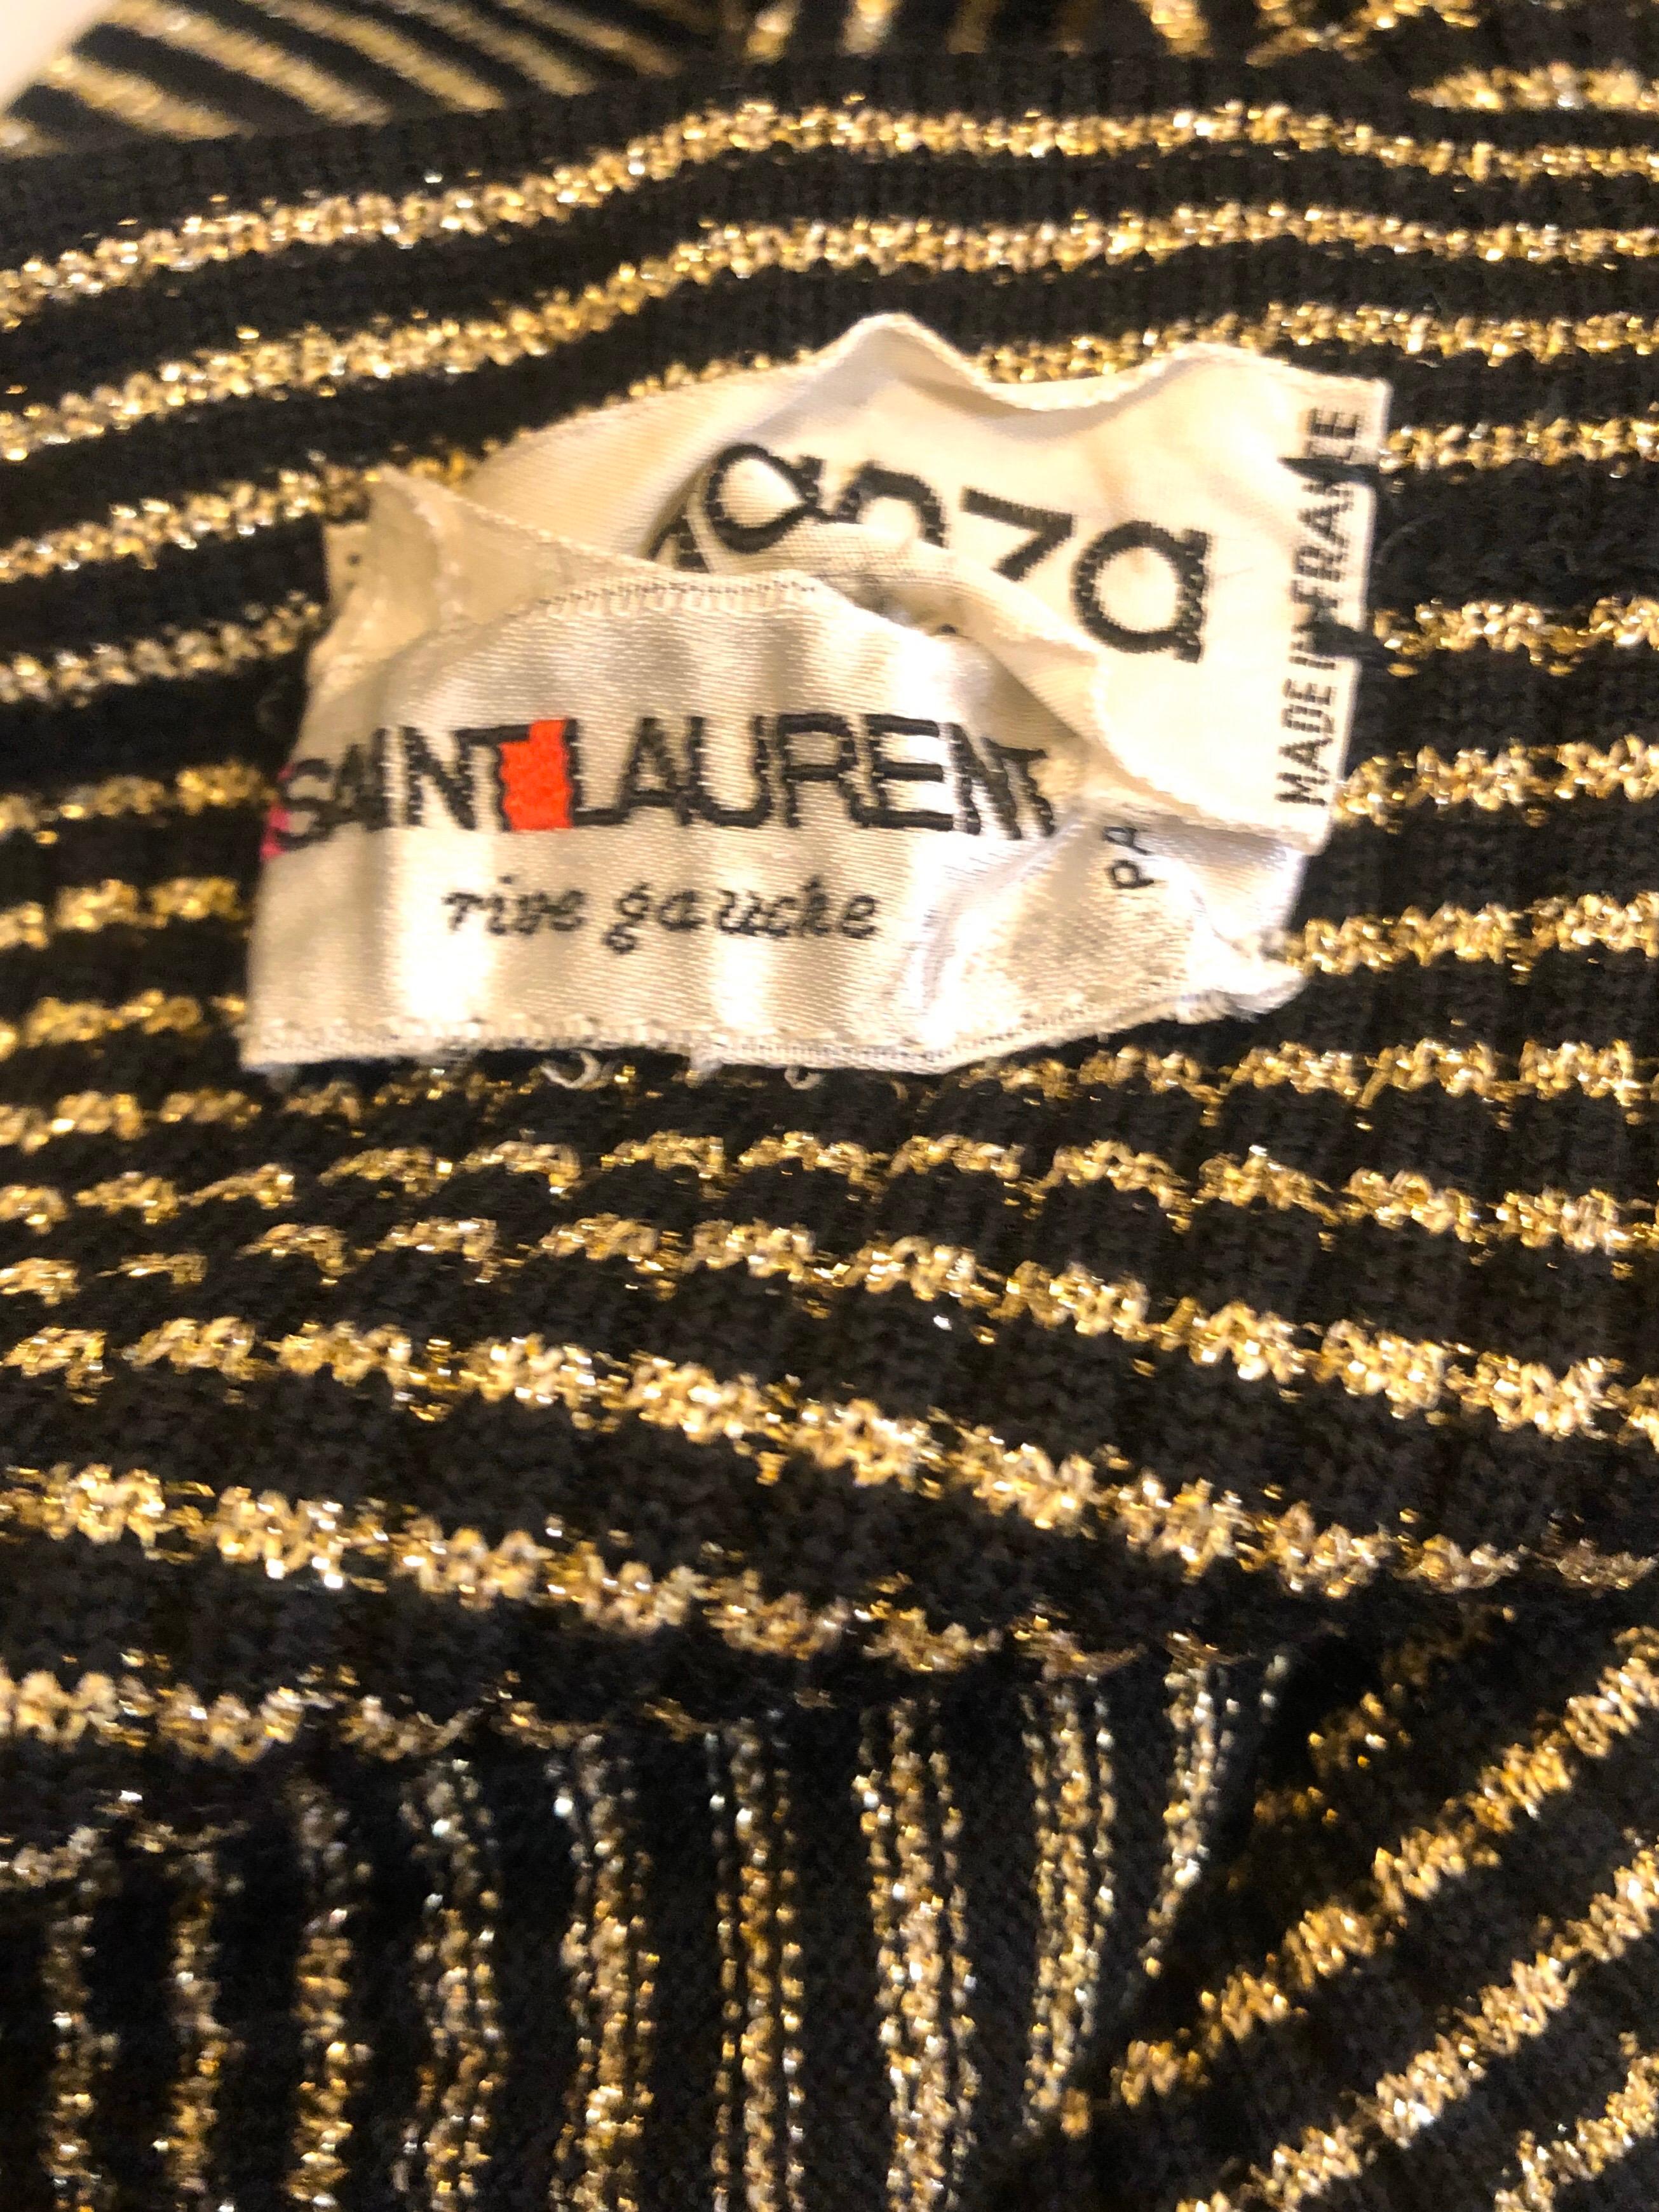 Fabulous 1970s YVES SAINT LAURENT Rive Gauche metallic gold and black striped knit strapless dress or maxi skirt! Soft stretchy knit material has a lot of give, so this can literally fit nearly any size. Simply slips on and stretches to fit. Can